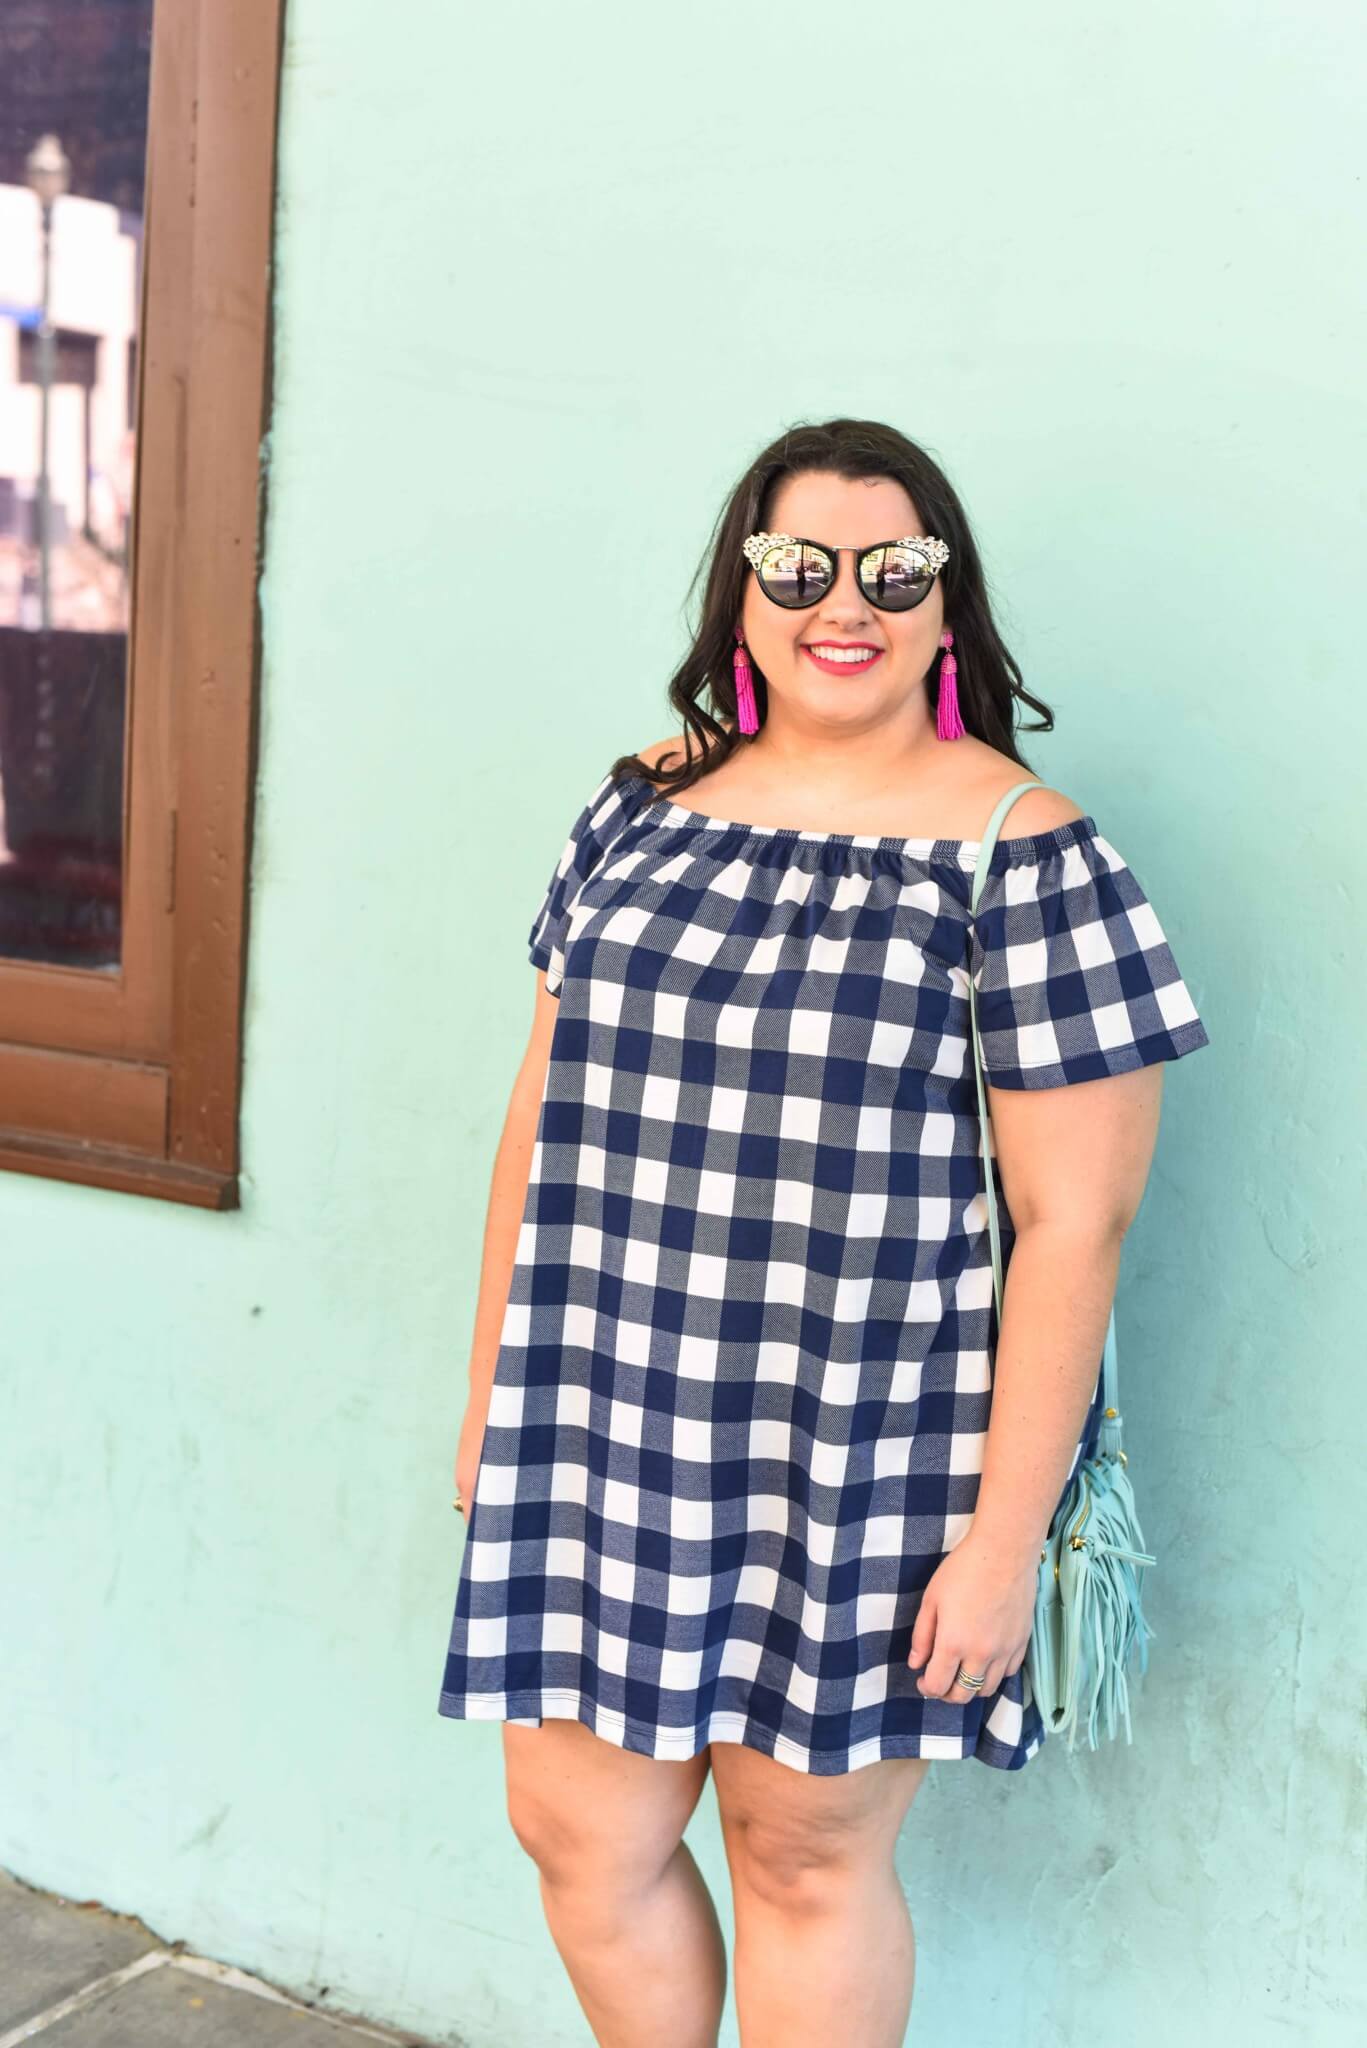 A gingham off the shoulder dress is a perfect way to kick off the summer. This preppy off the shoulder dress is perfect for anyone who wants to look chic while being comfortable. Plus size style blogger, Emily Bastedo from Something Gold, Something Blue shares how she would style this blue gingham off the shoulder dress for a weekend casual look.